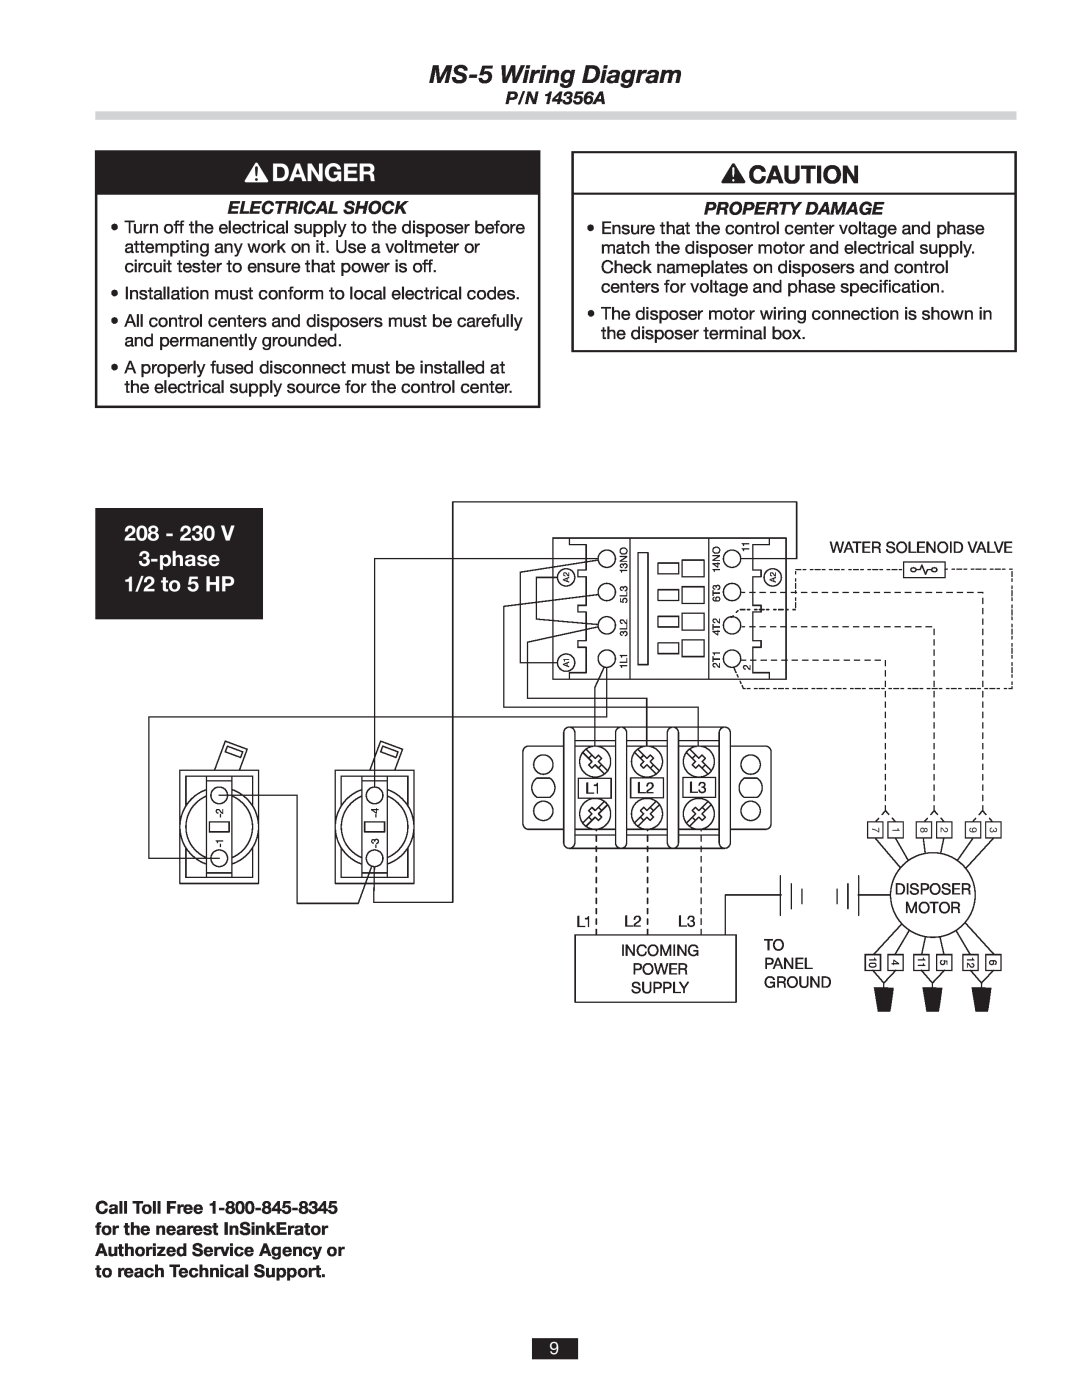 InSinkErator 208 - 230 3-phase 1/2 to 5 HP, MS-5Wiring Diagram, P/N 14356A, Electrical Shock, Property Damage 